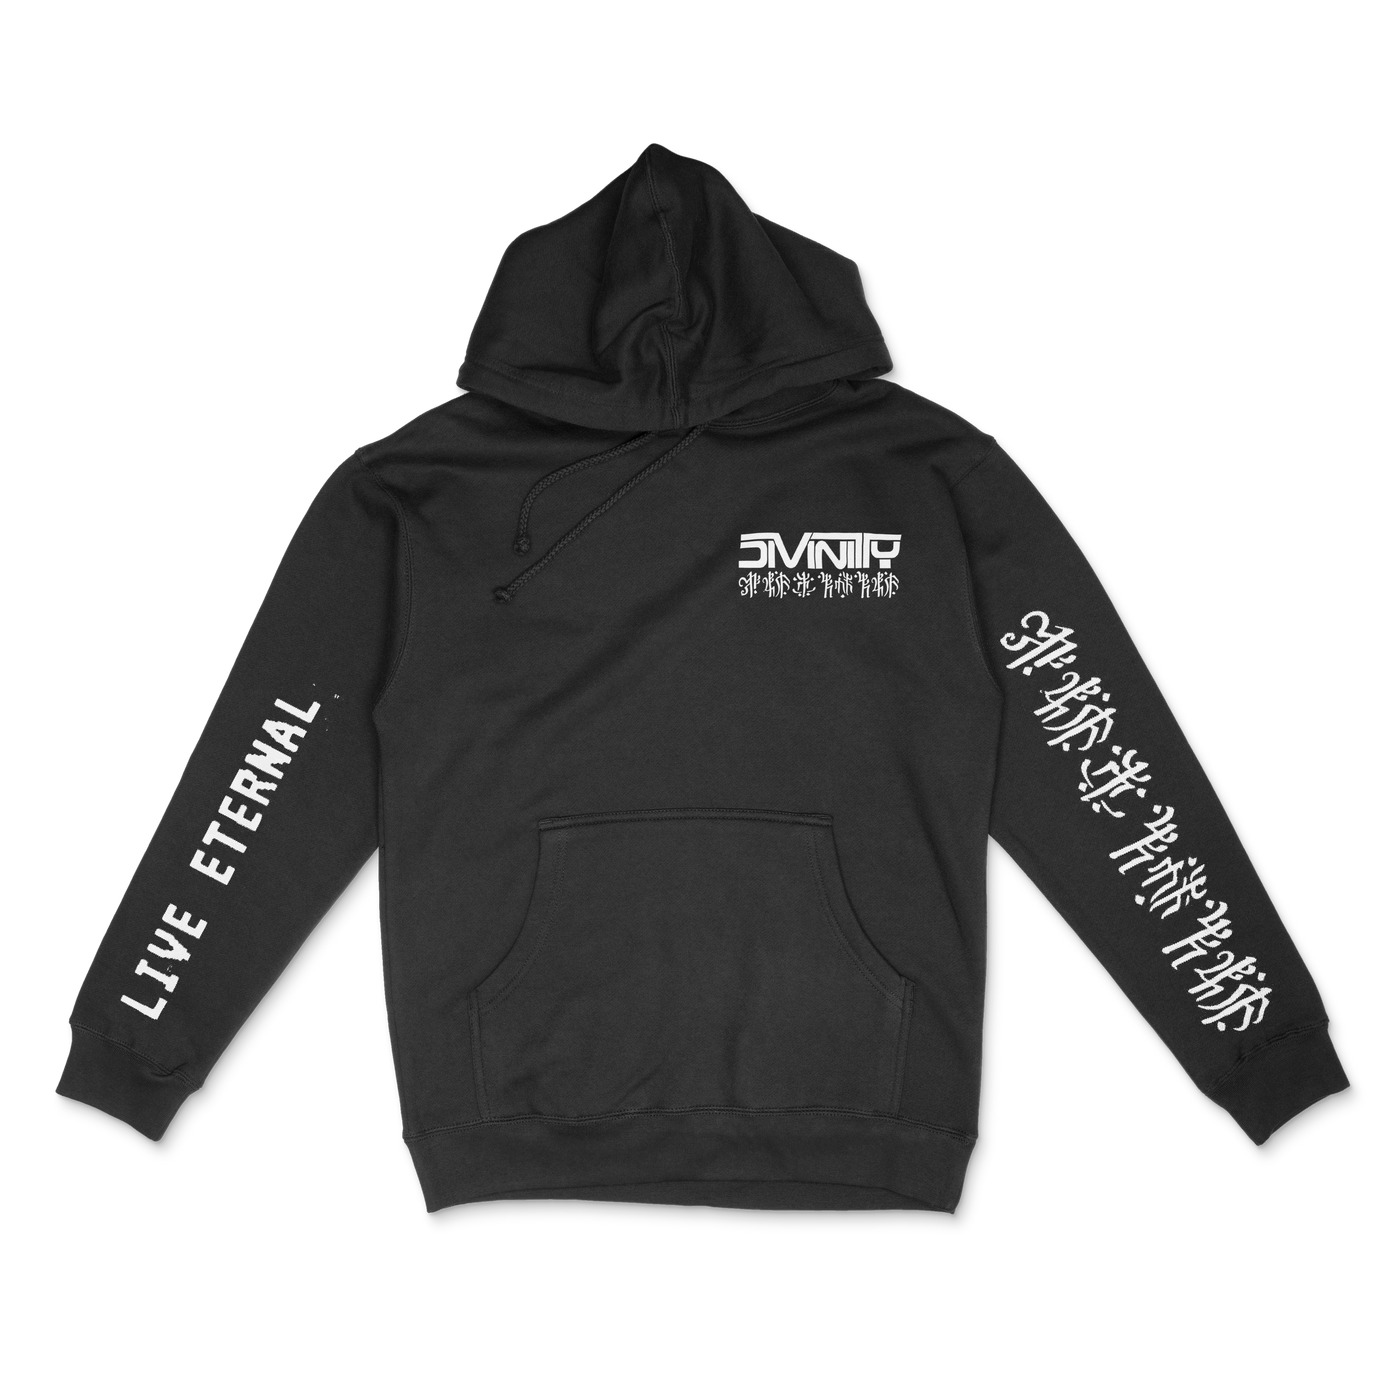 Divinity x Goat Witch Goods Hoodie